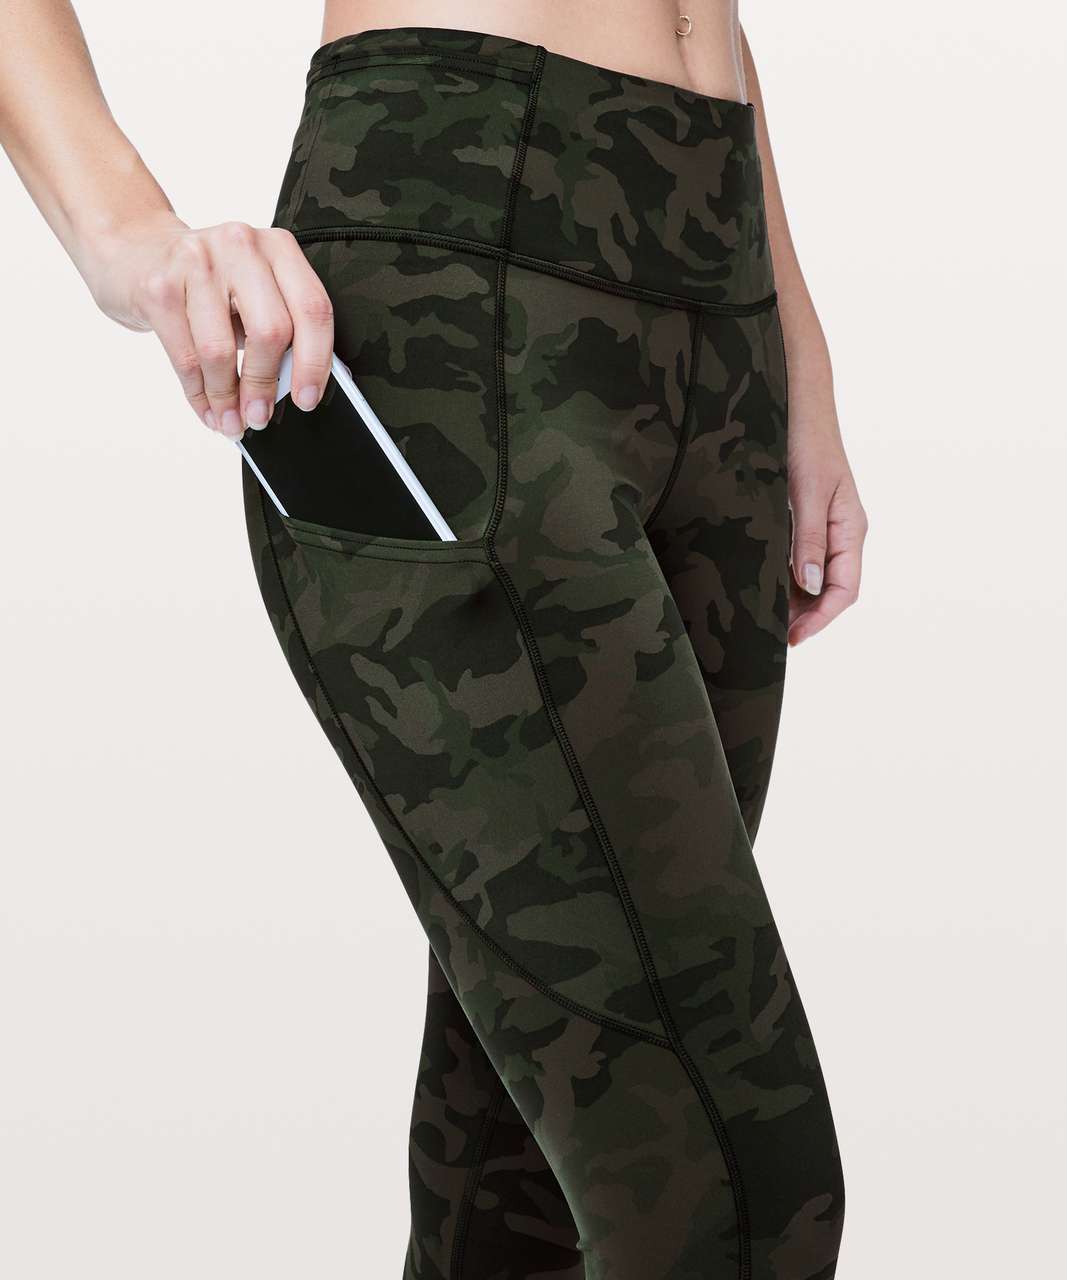 Lululemon Size 2 Fast Free HR Tight 25” Camo Green HCMO Nulux Pant Run